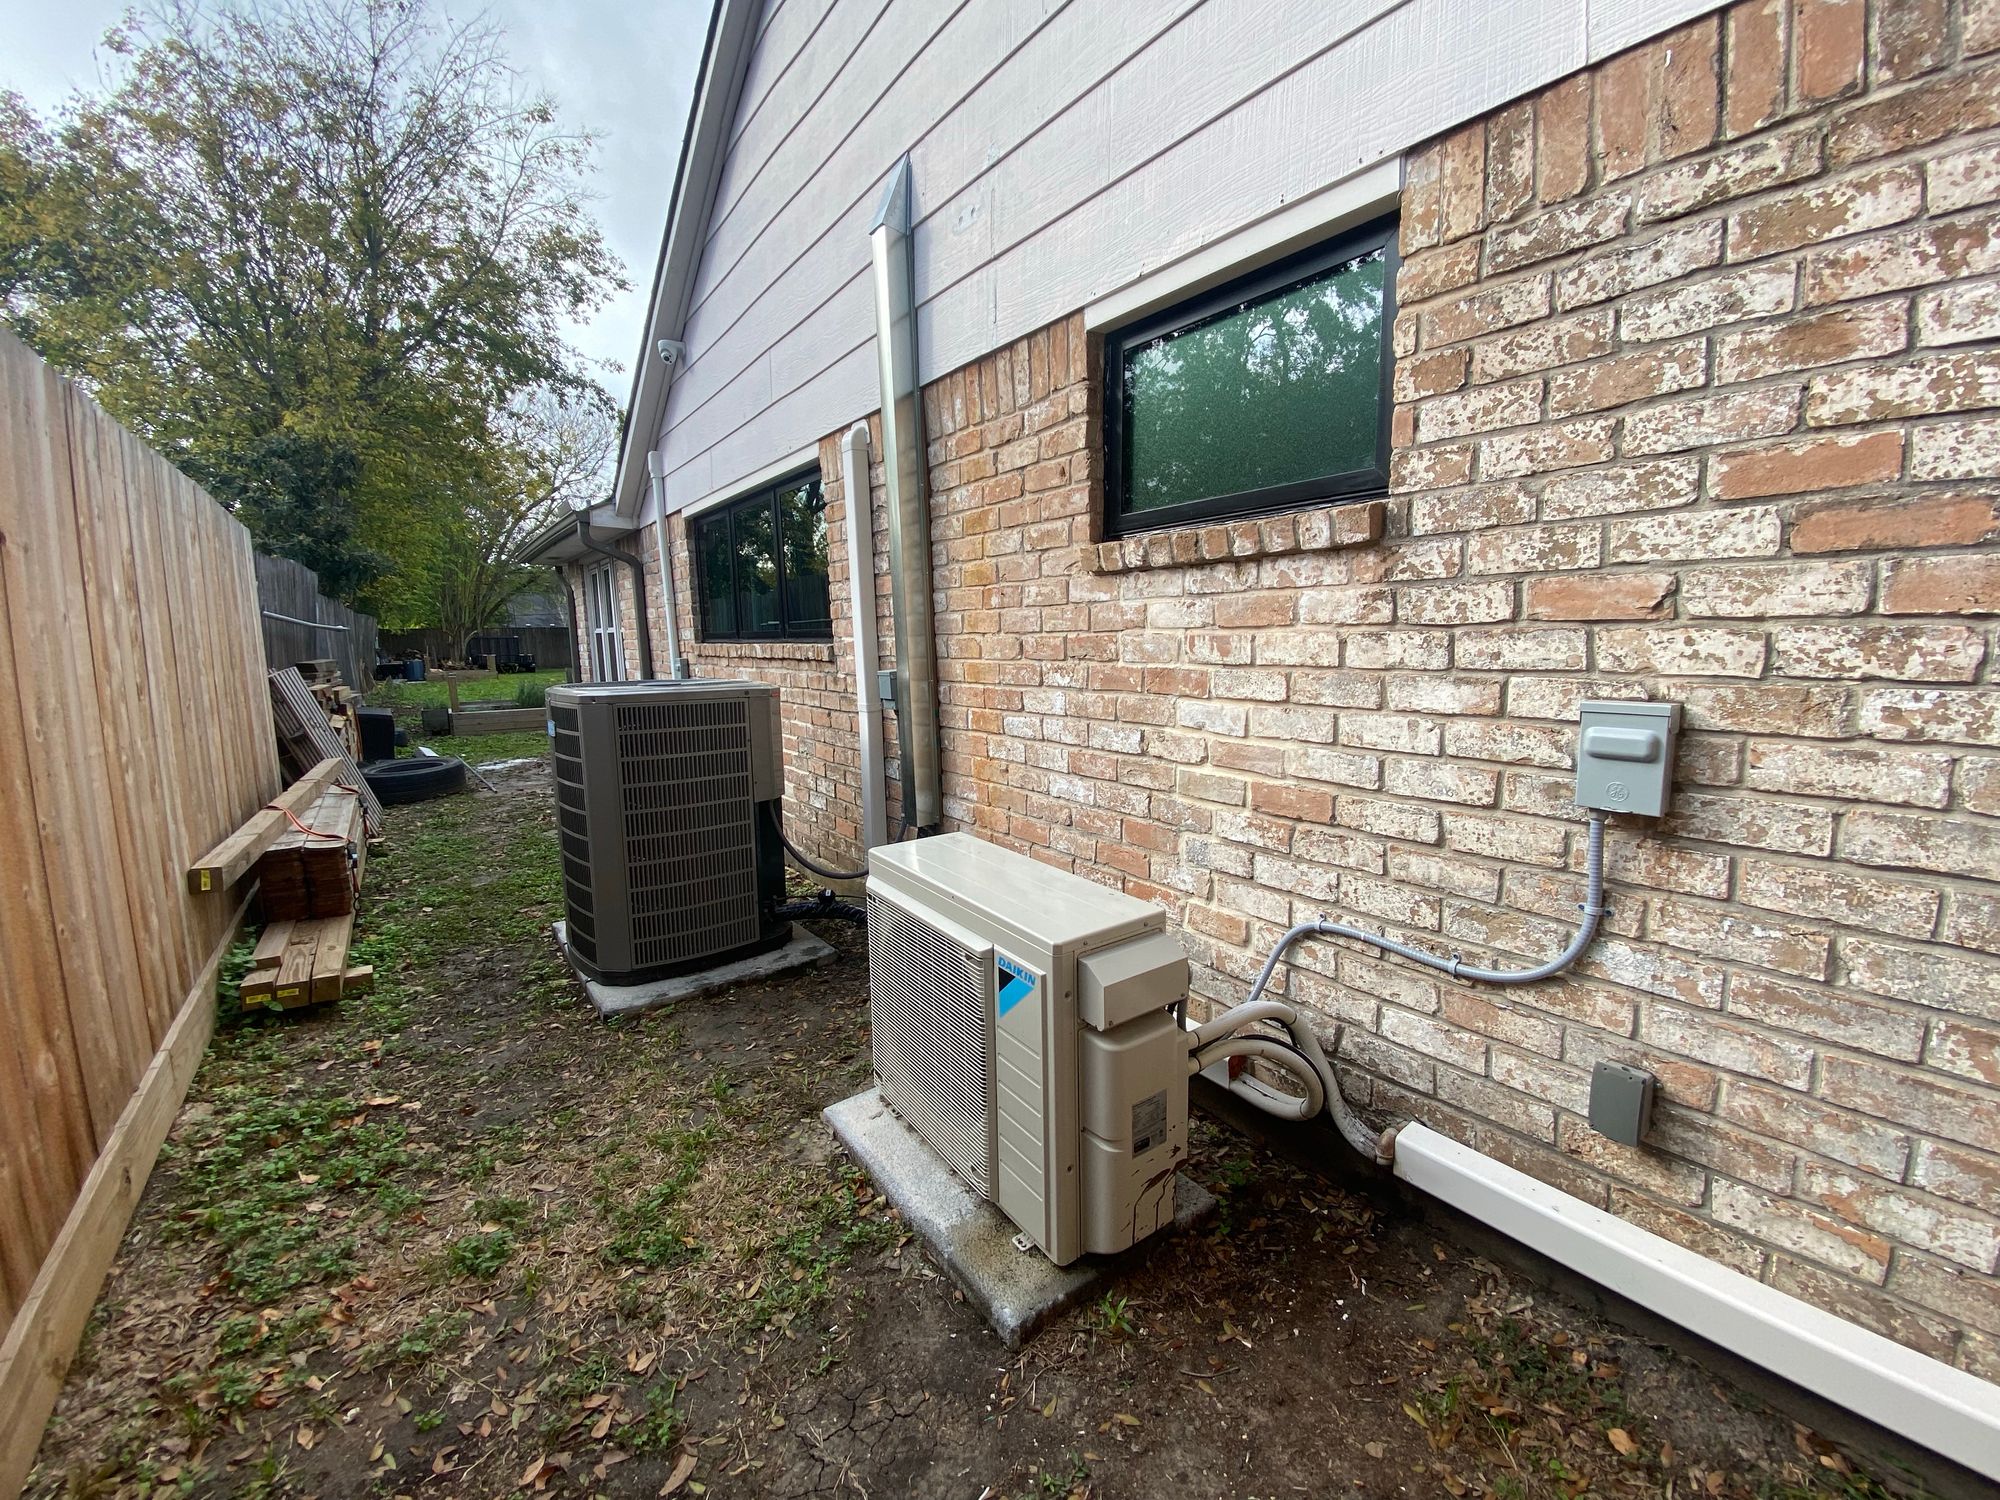 Redundant Heating and Cooling with Mini Split heat pumps